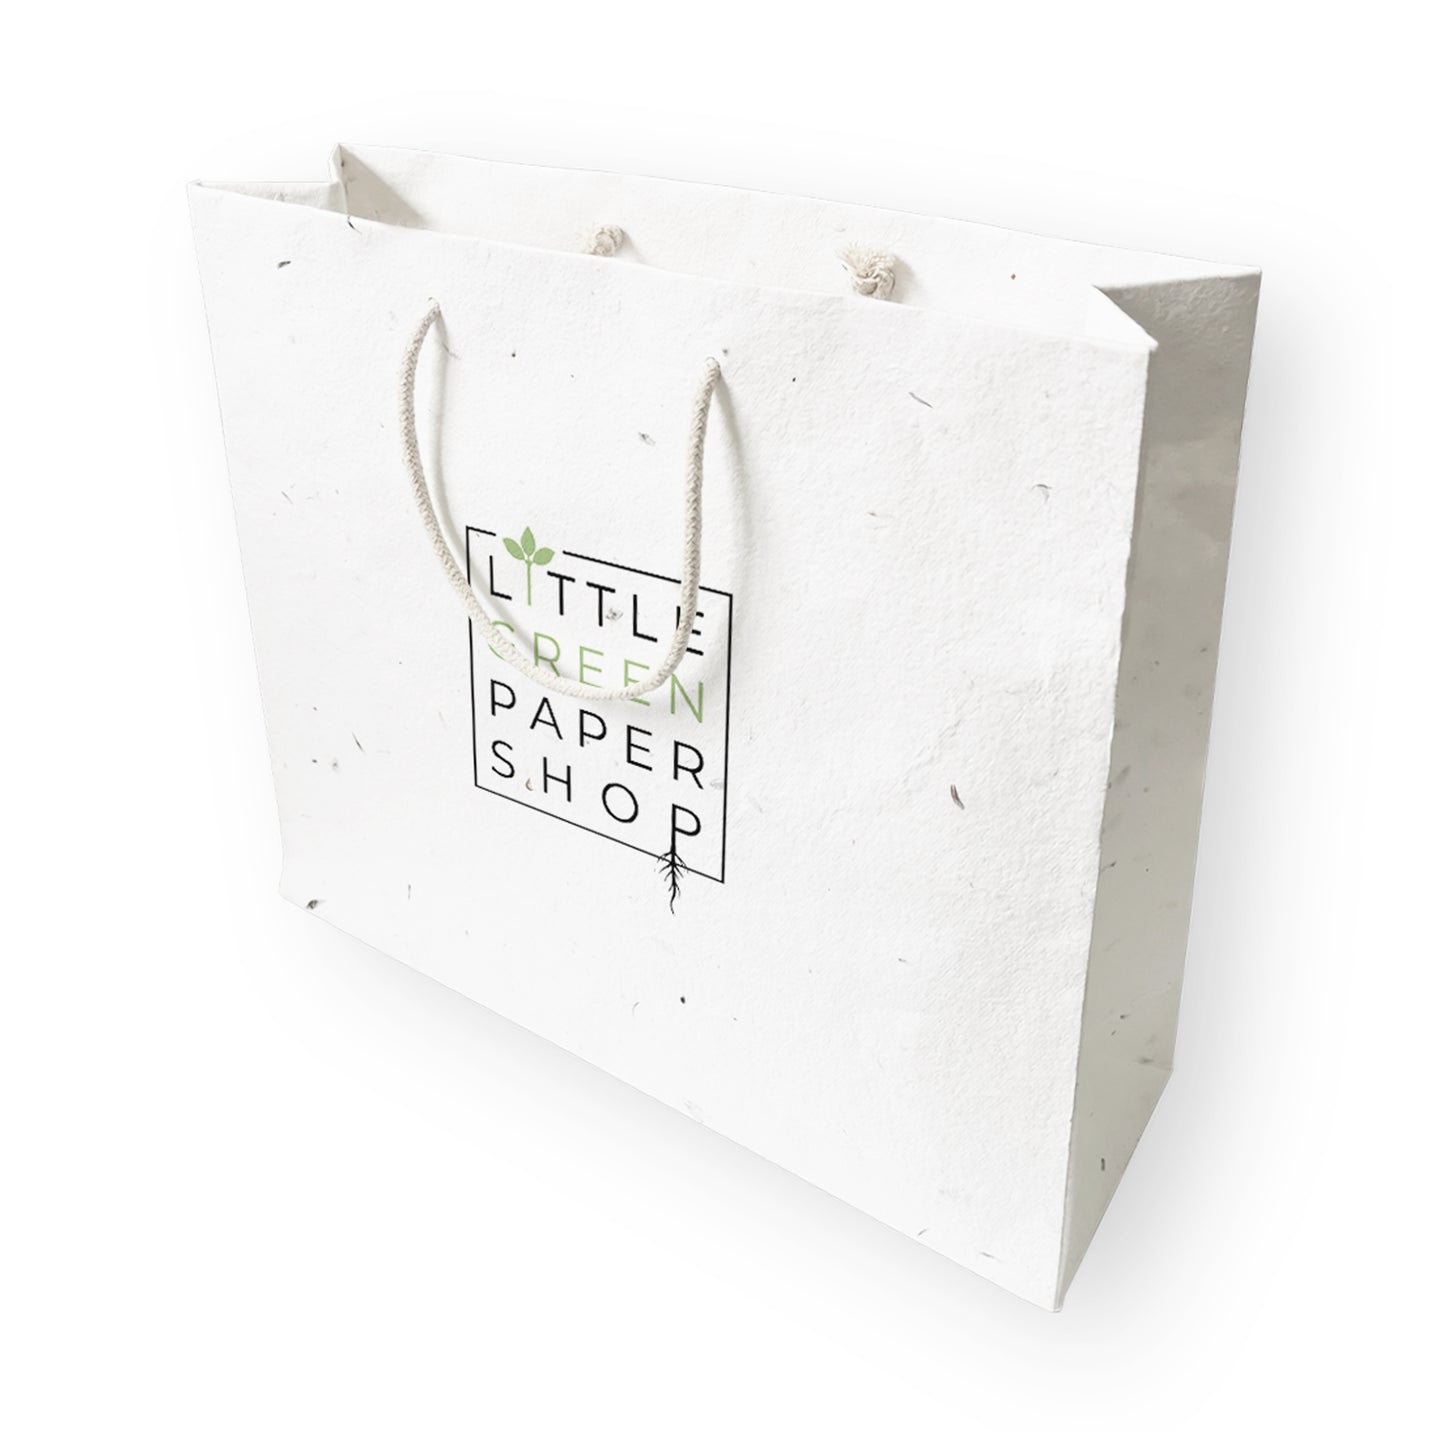 Gifting - Gift Bag, Plantable with Seeded tissue paper included